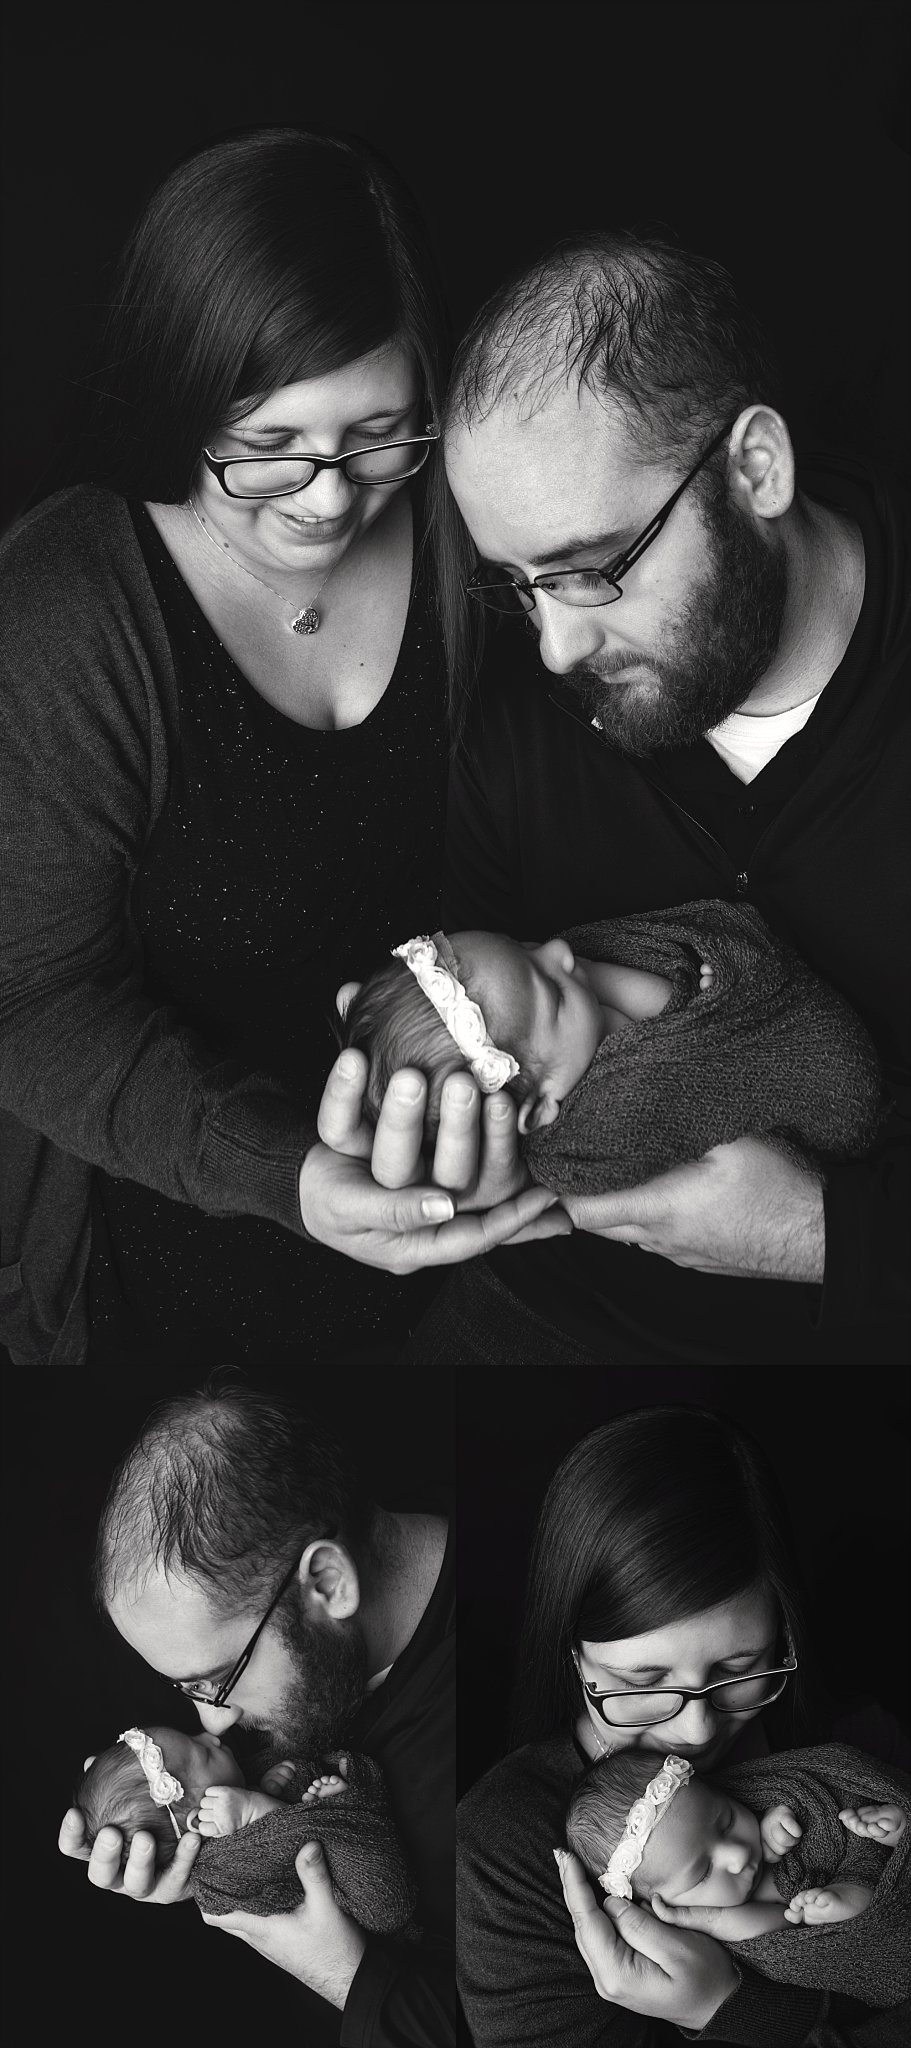 st-louis-newborn-photographer-baby-girl-with-mom-and-dad-blcak-and-white-collage.jpg